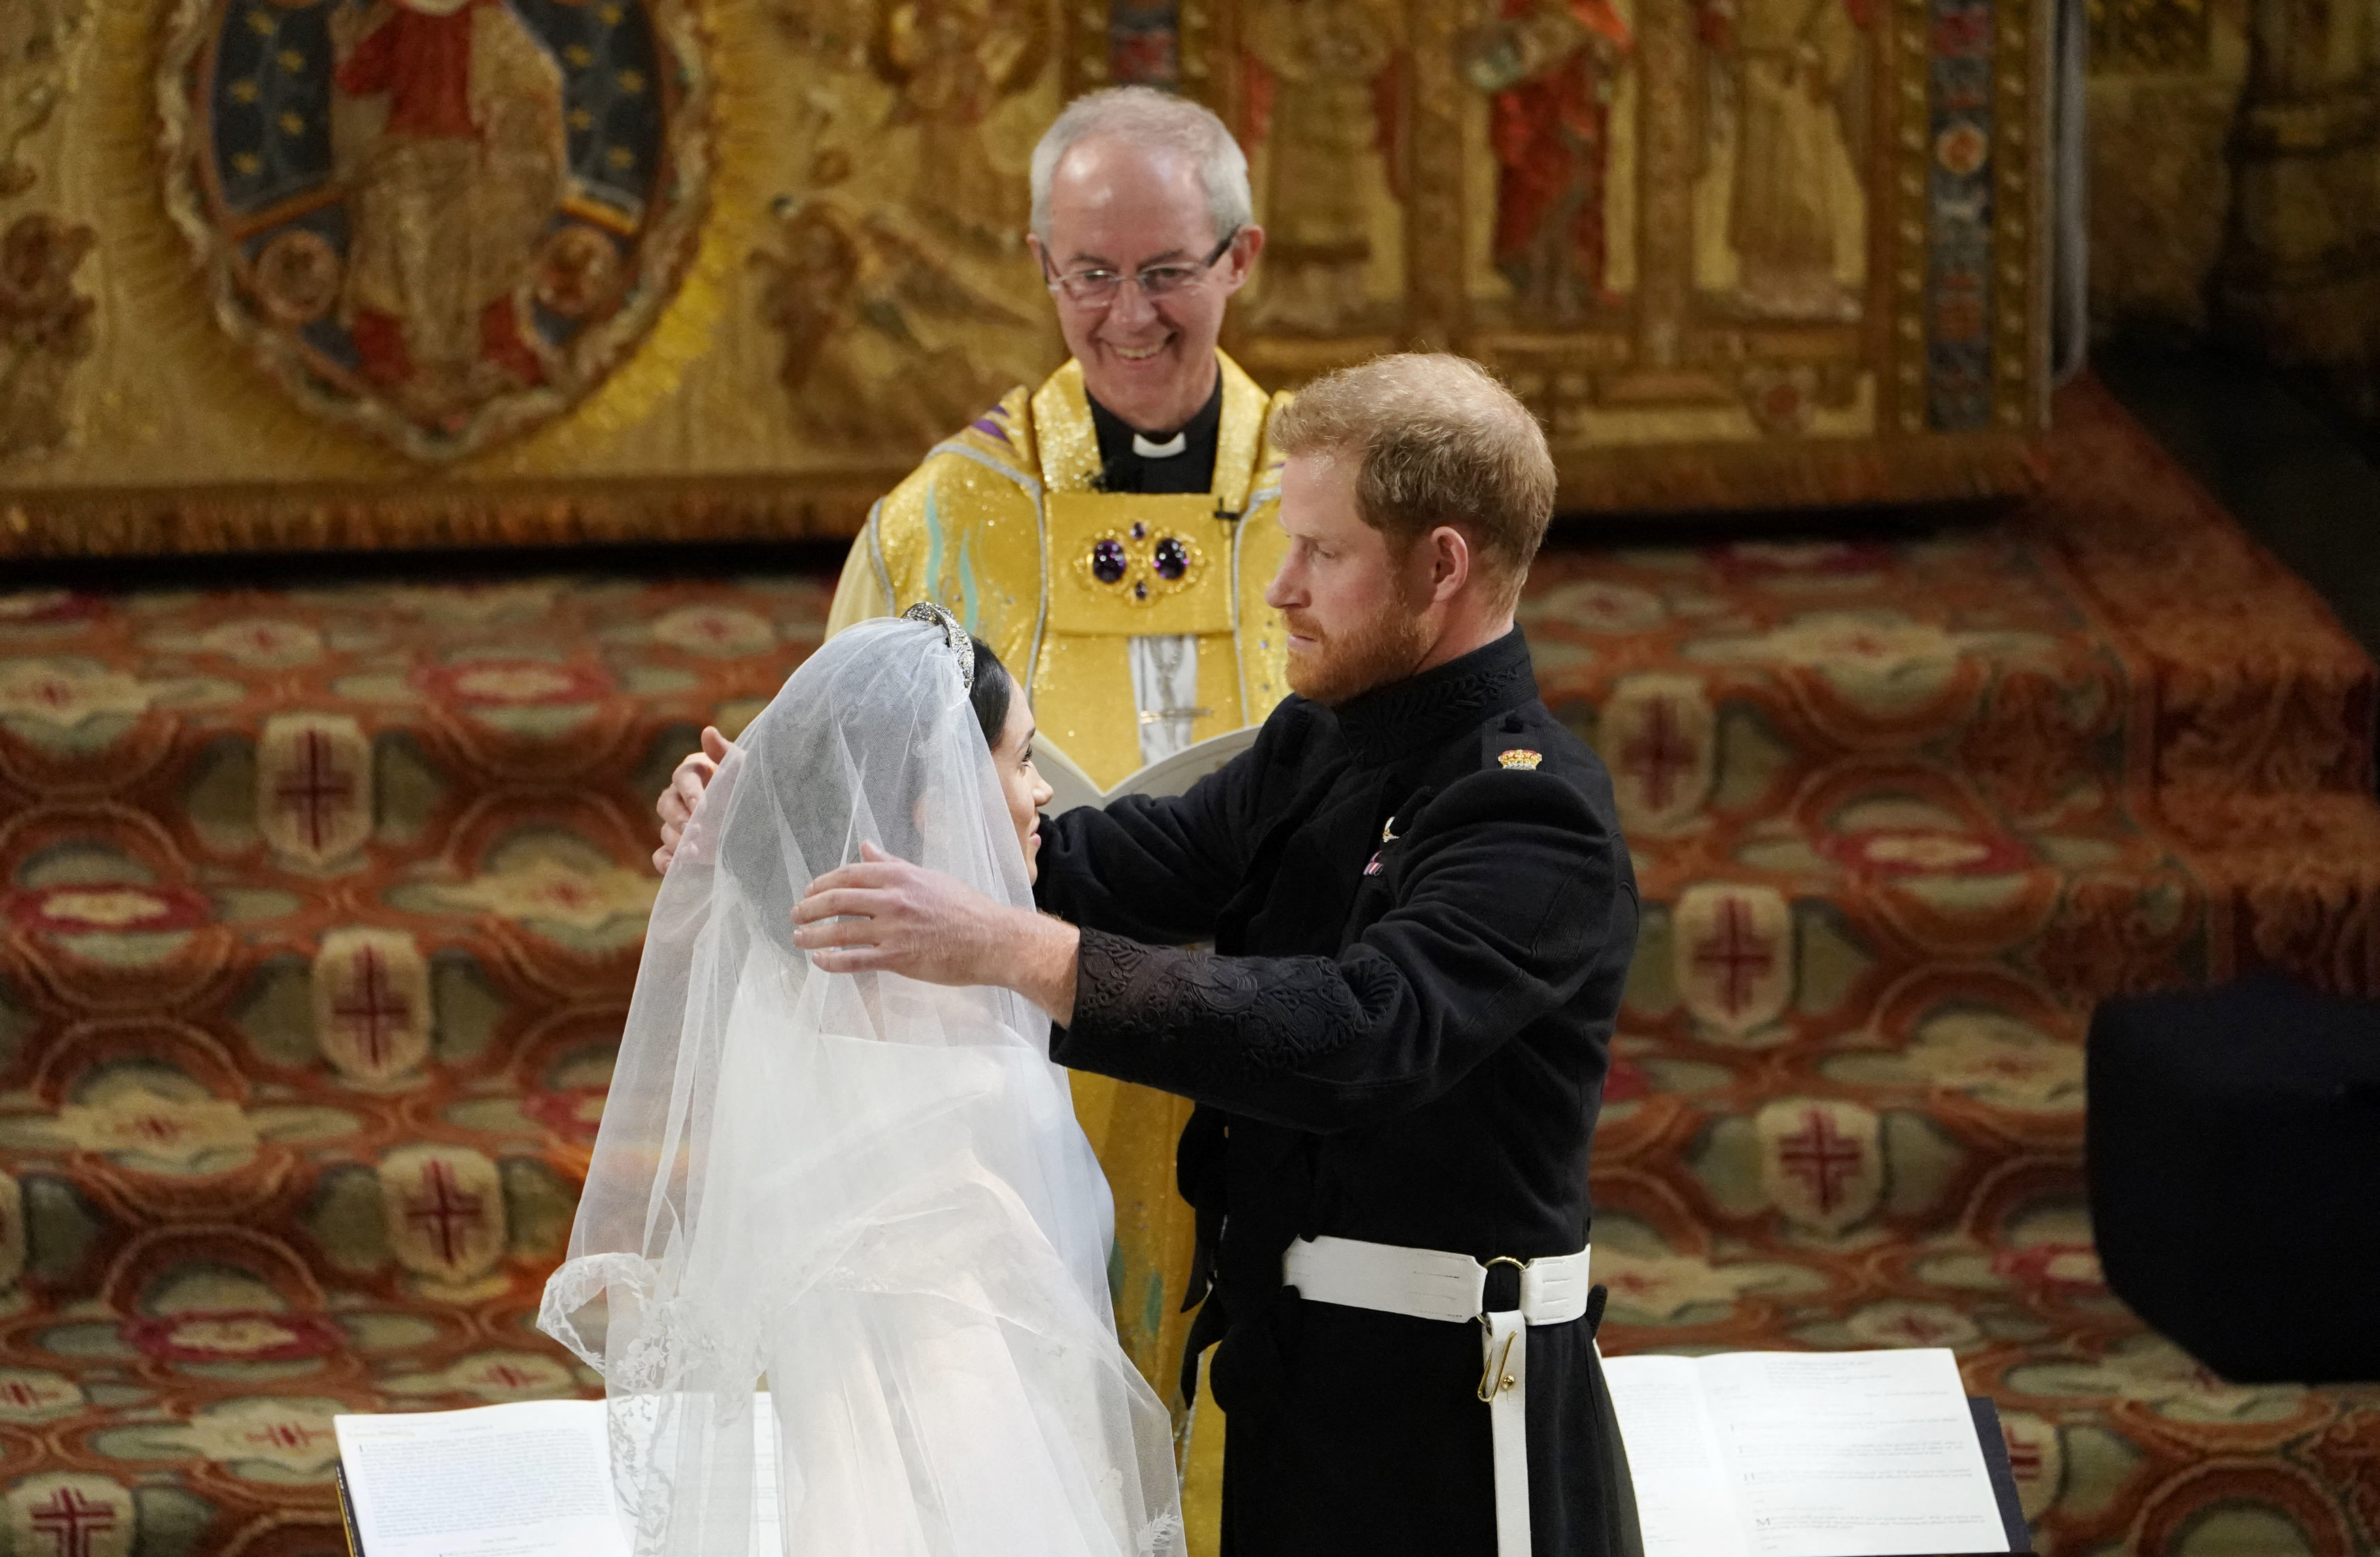 Prince Harry removes the veil of Meghan Markle before Archbishop of Canterbury Justin Welby (C) in St George's Chapel, Windsor Castle, in Windsor, on May 19, 2018. | Source: Getty Images